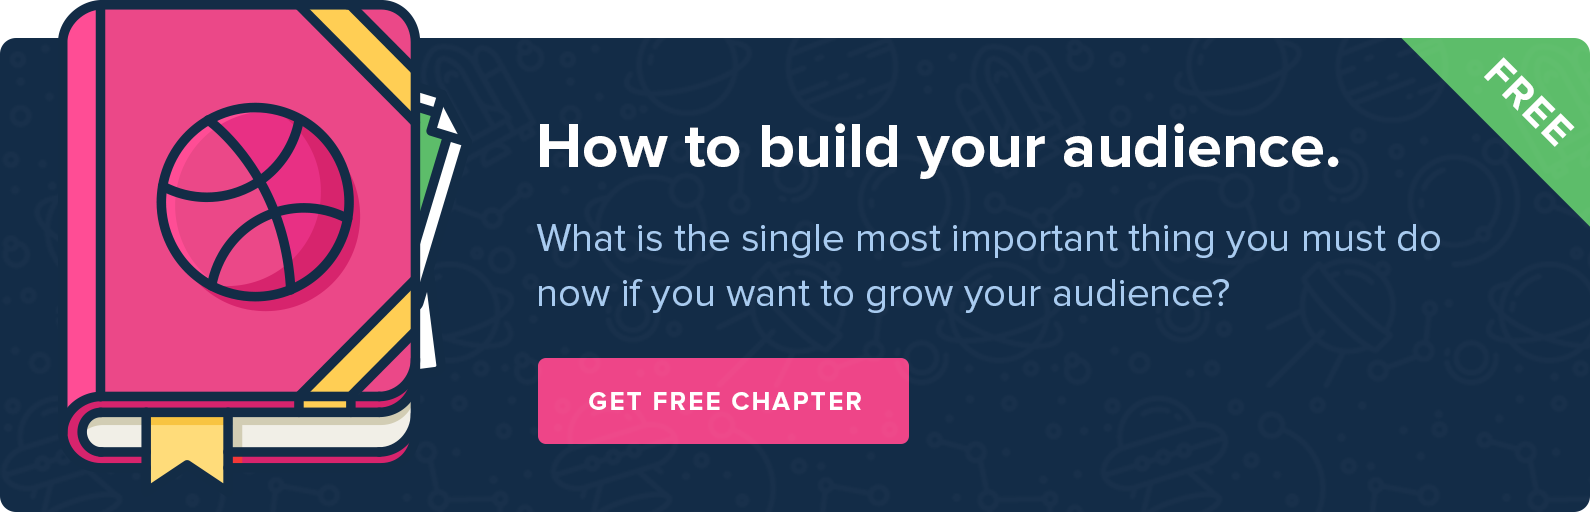 build-your-audience